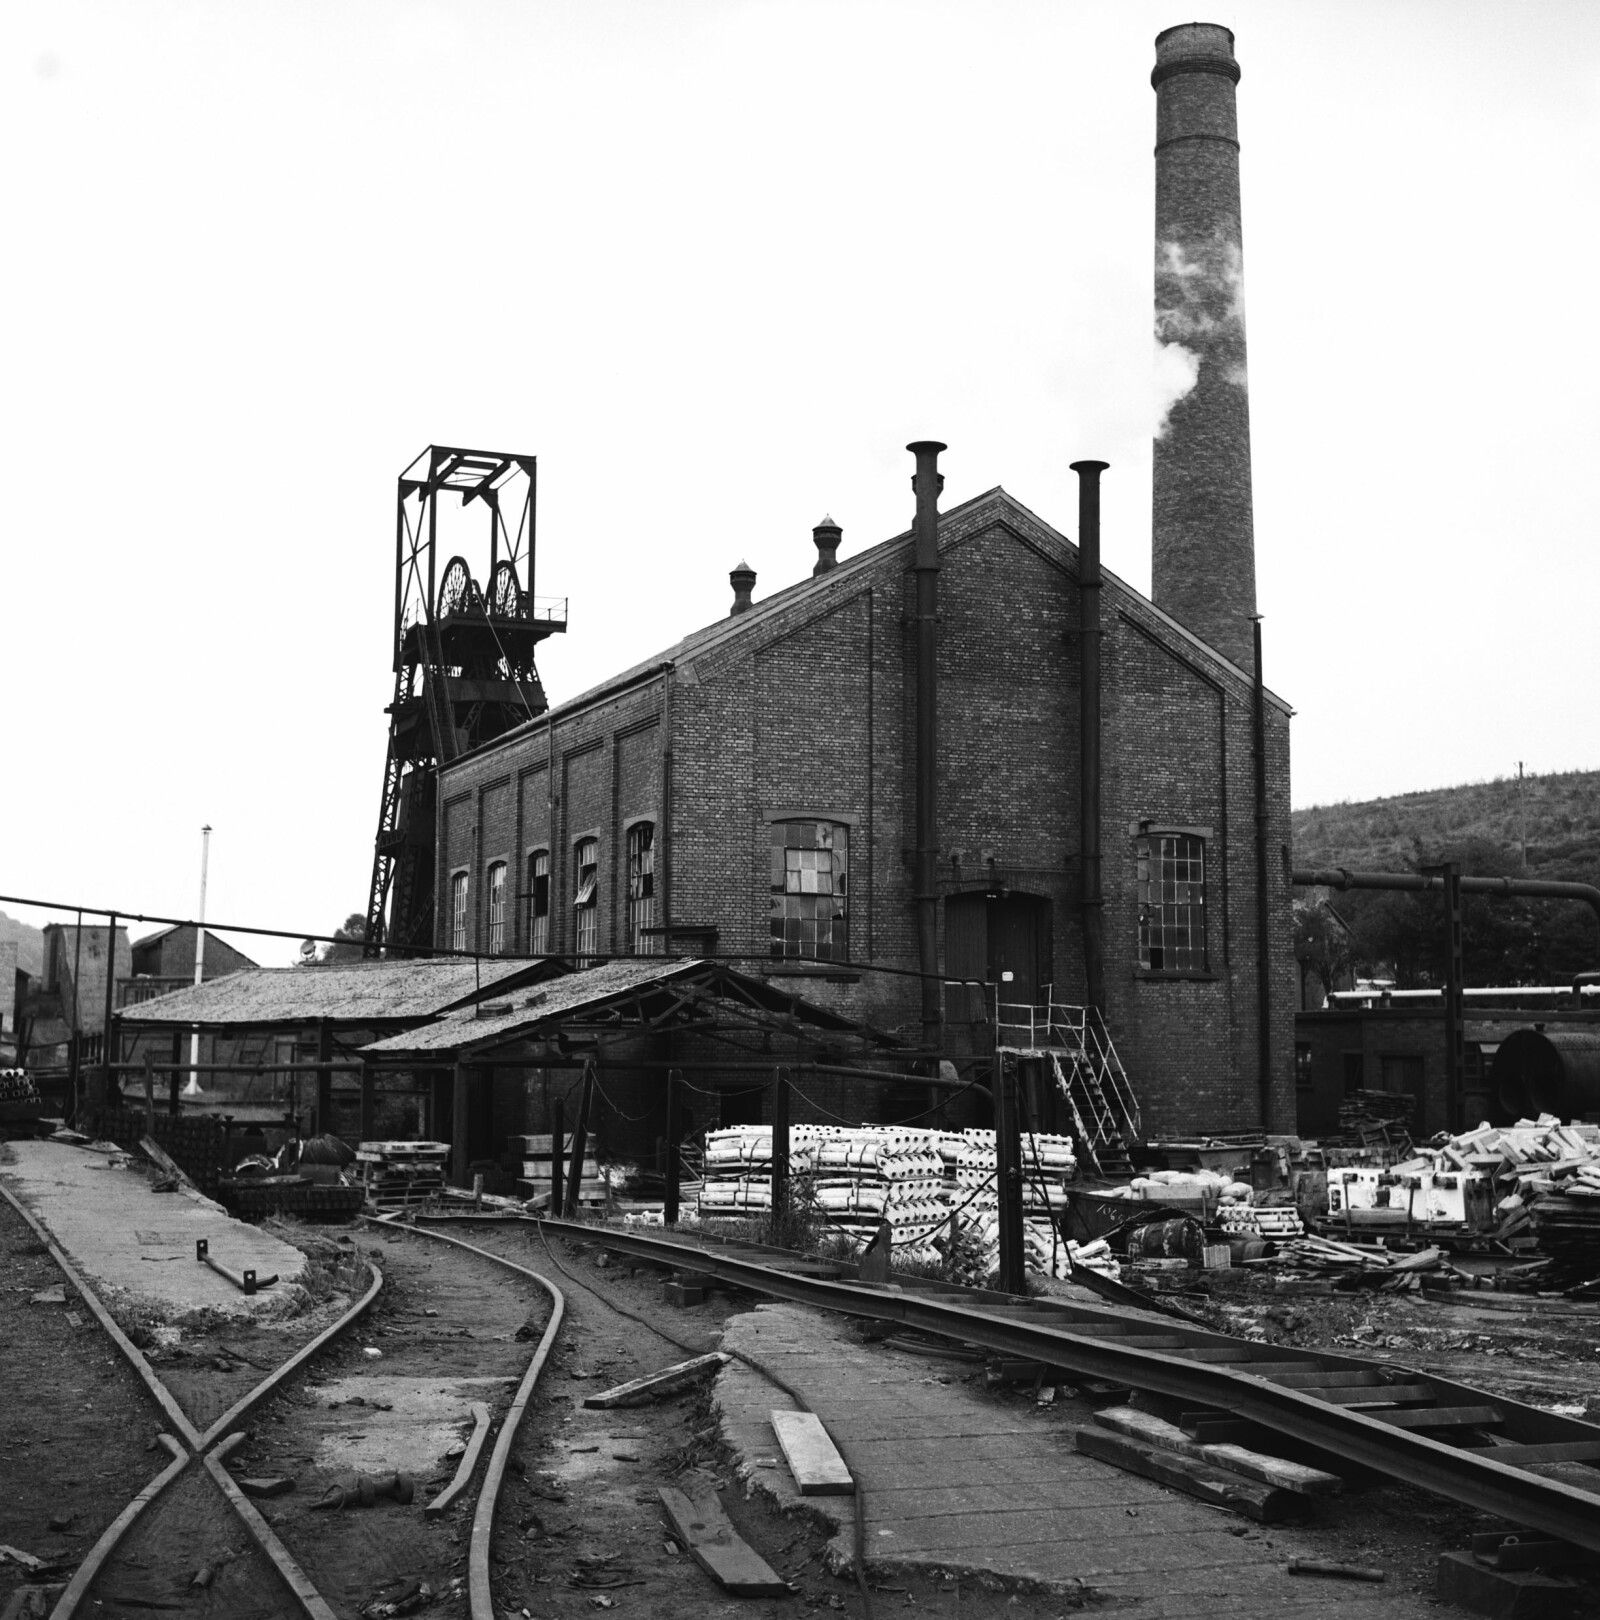 Cefn Coed Colliery engine house for the Markham engine on the upcast shaft 1973.